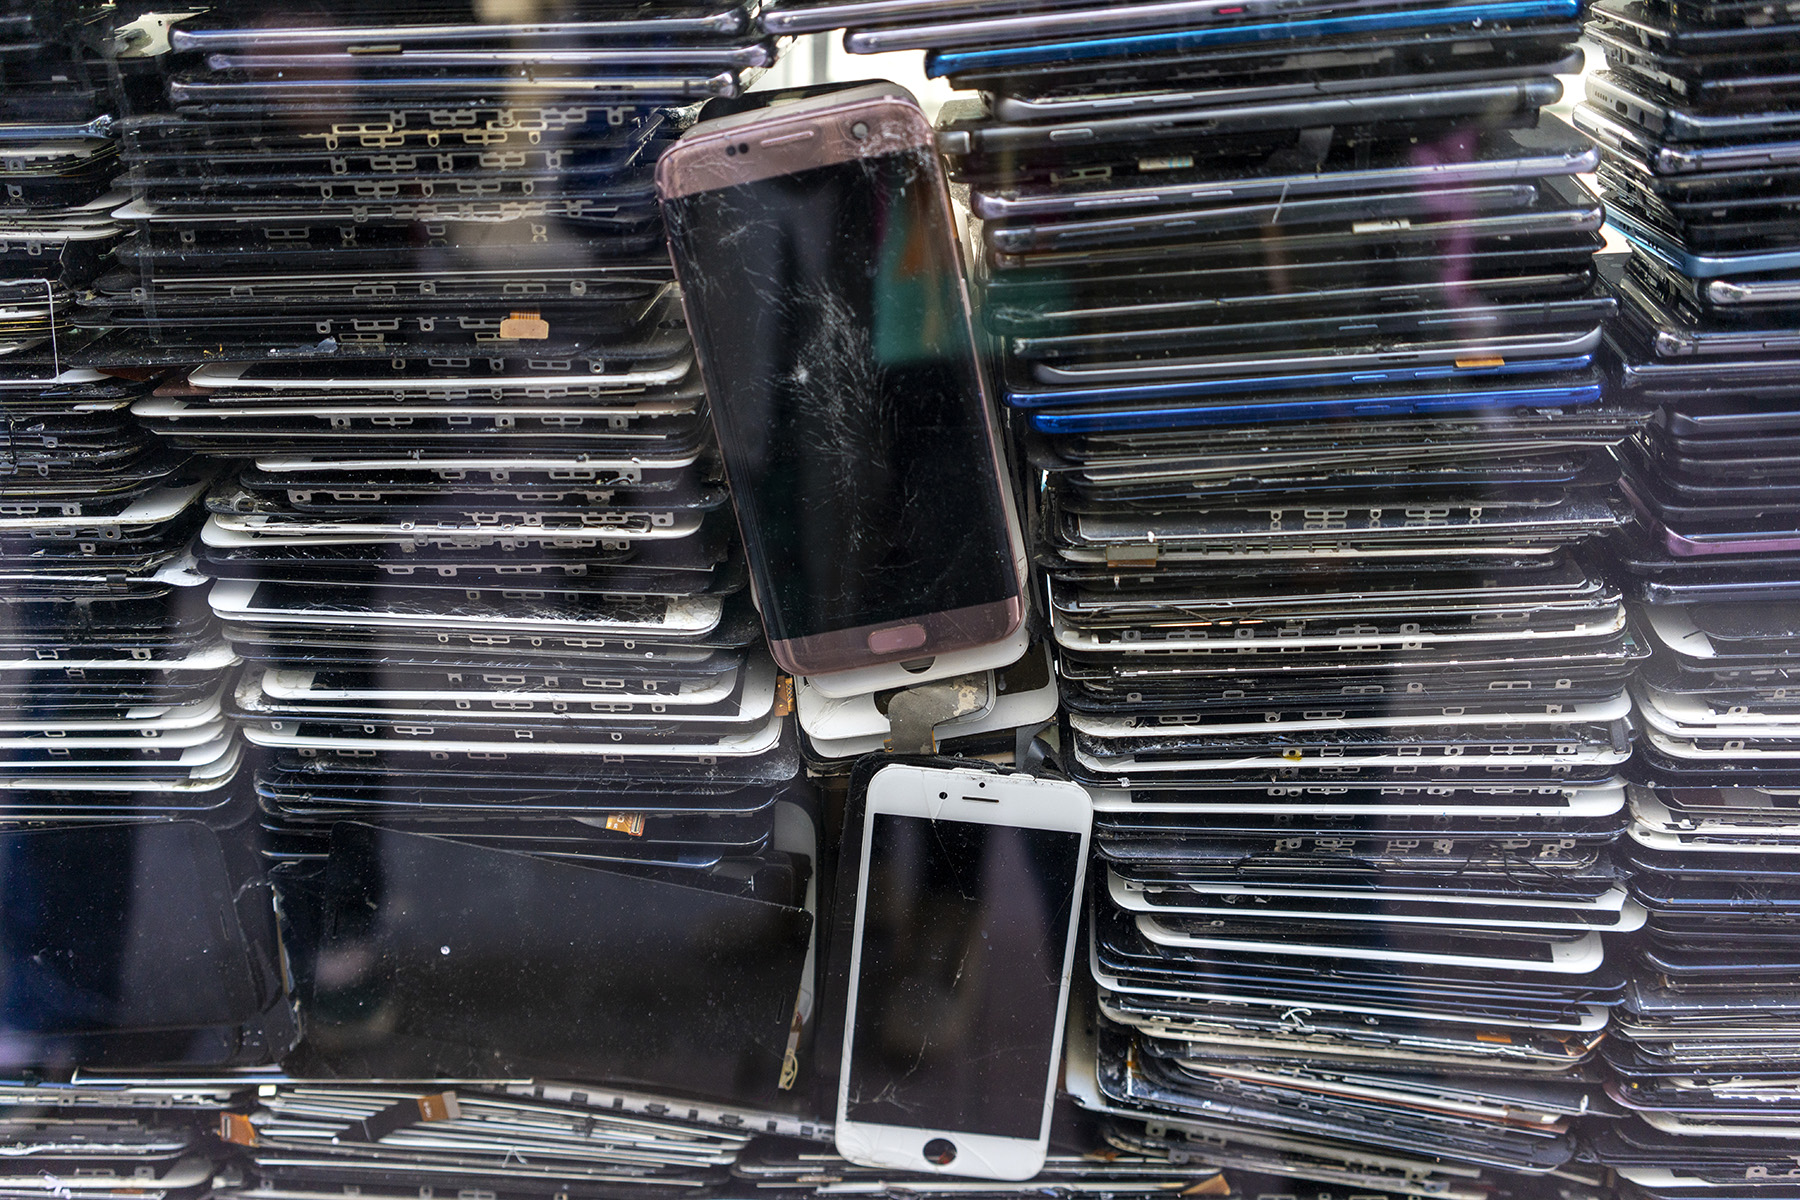 Piles of discarded mobile phones and tablets behind a window